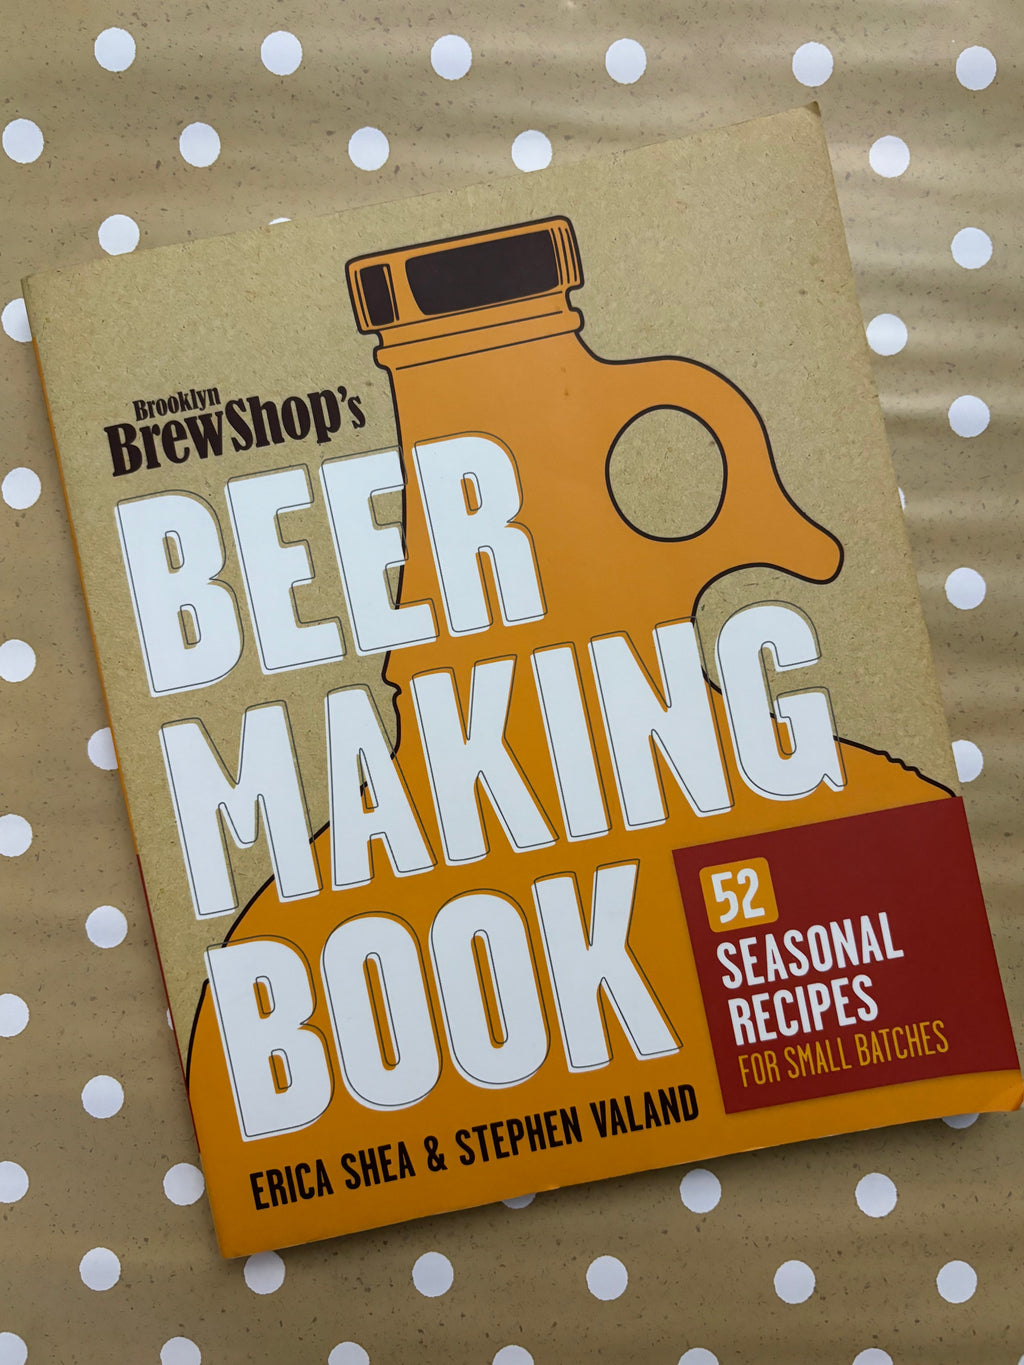 Brooklyn Brew Shop's Beer Making Book- By Erica Shea & Stephen Valand